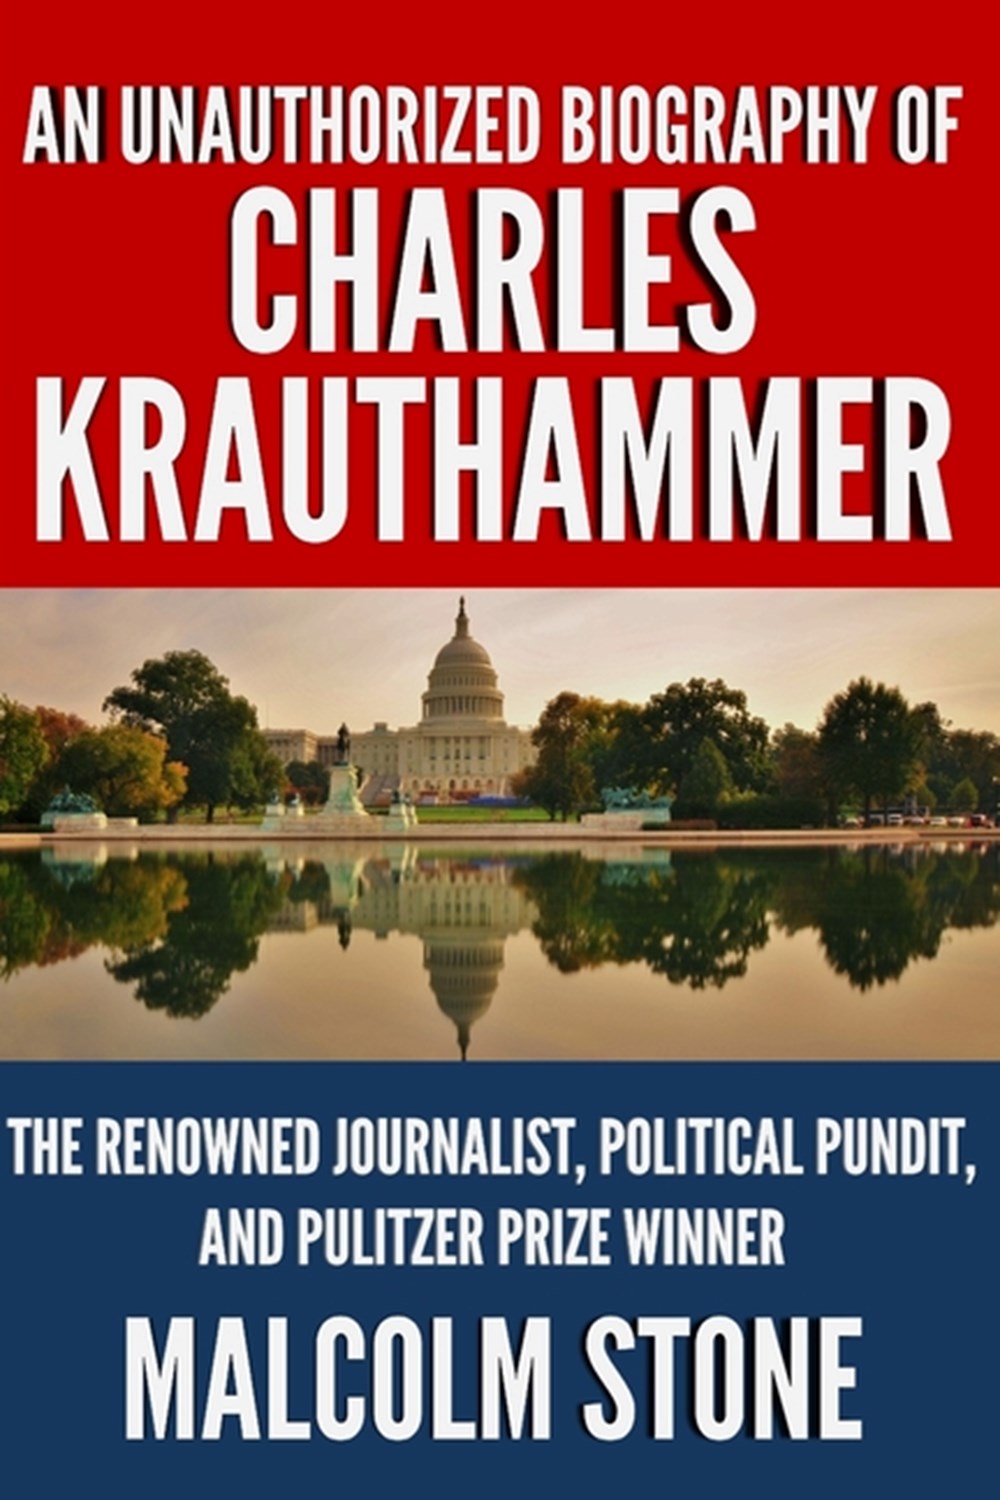 Unauthorized Biography of Charles Krauthammer The Renowned Journalist, Political Pundit, and Pulitze